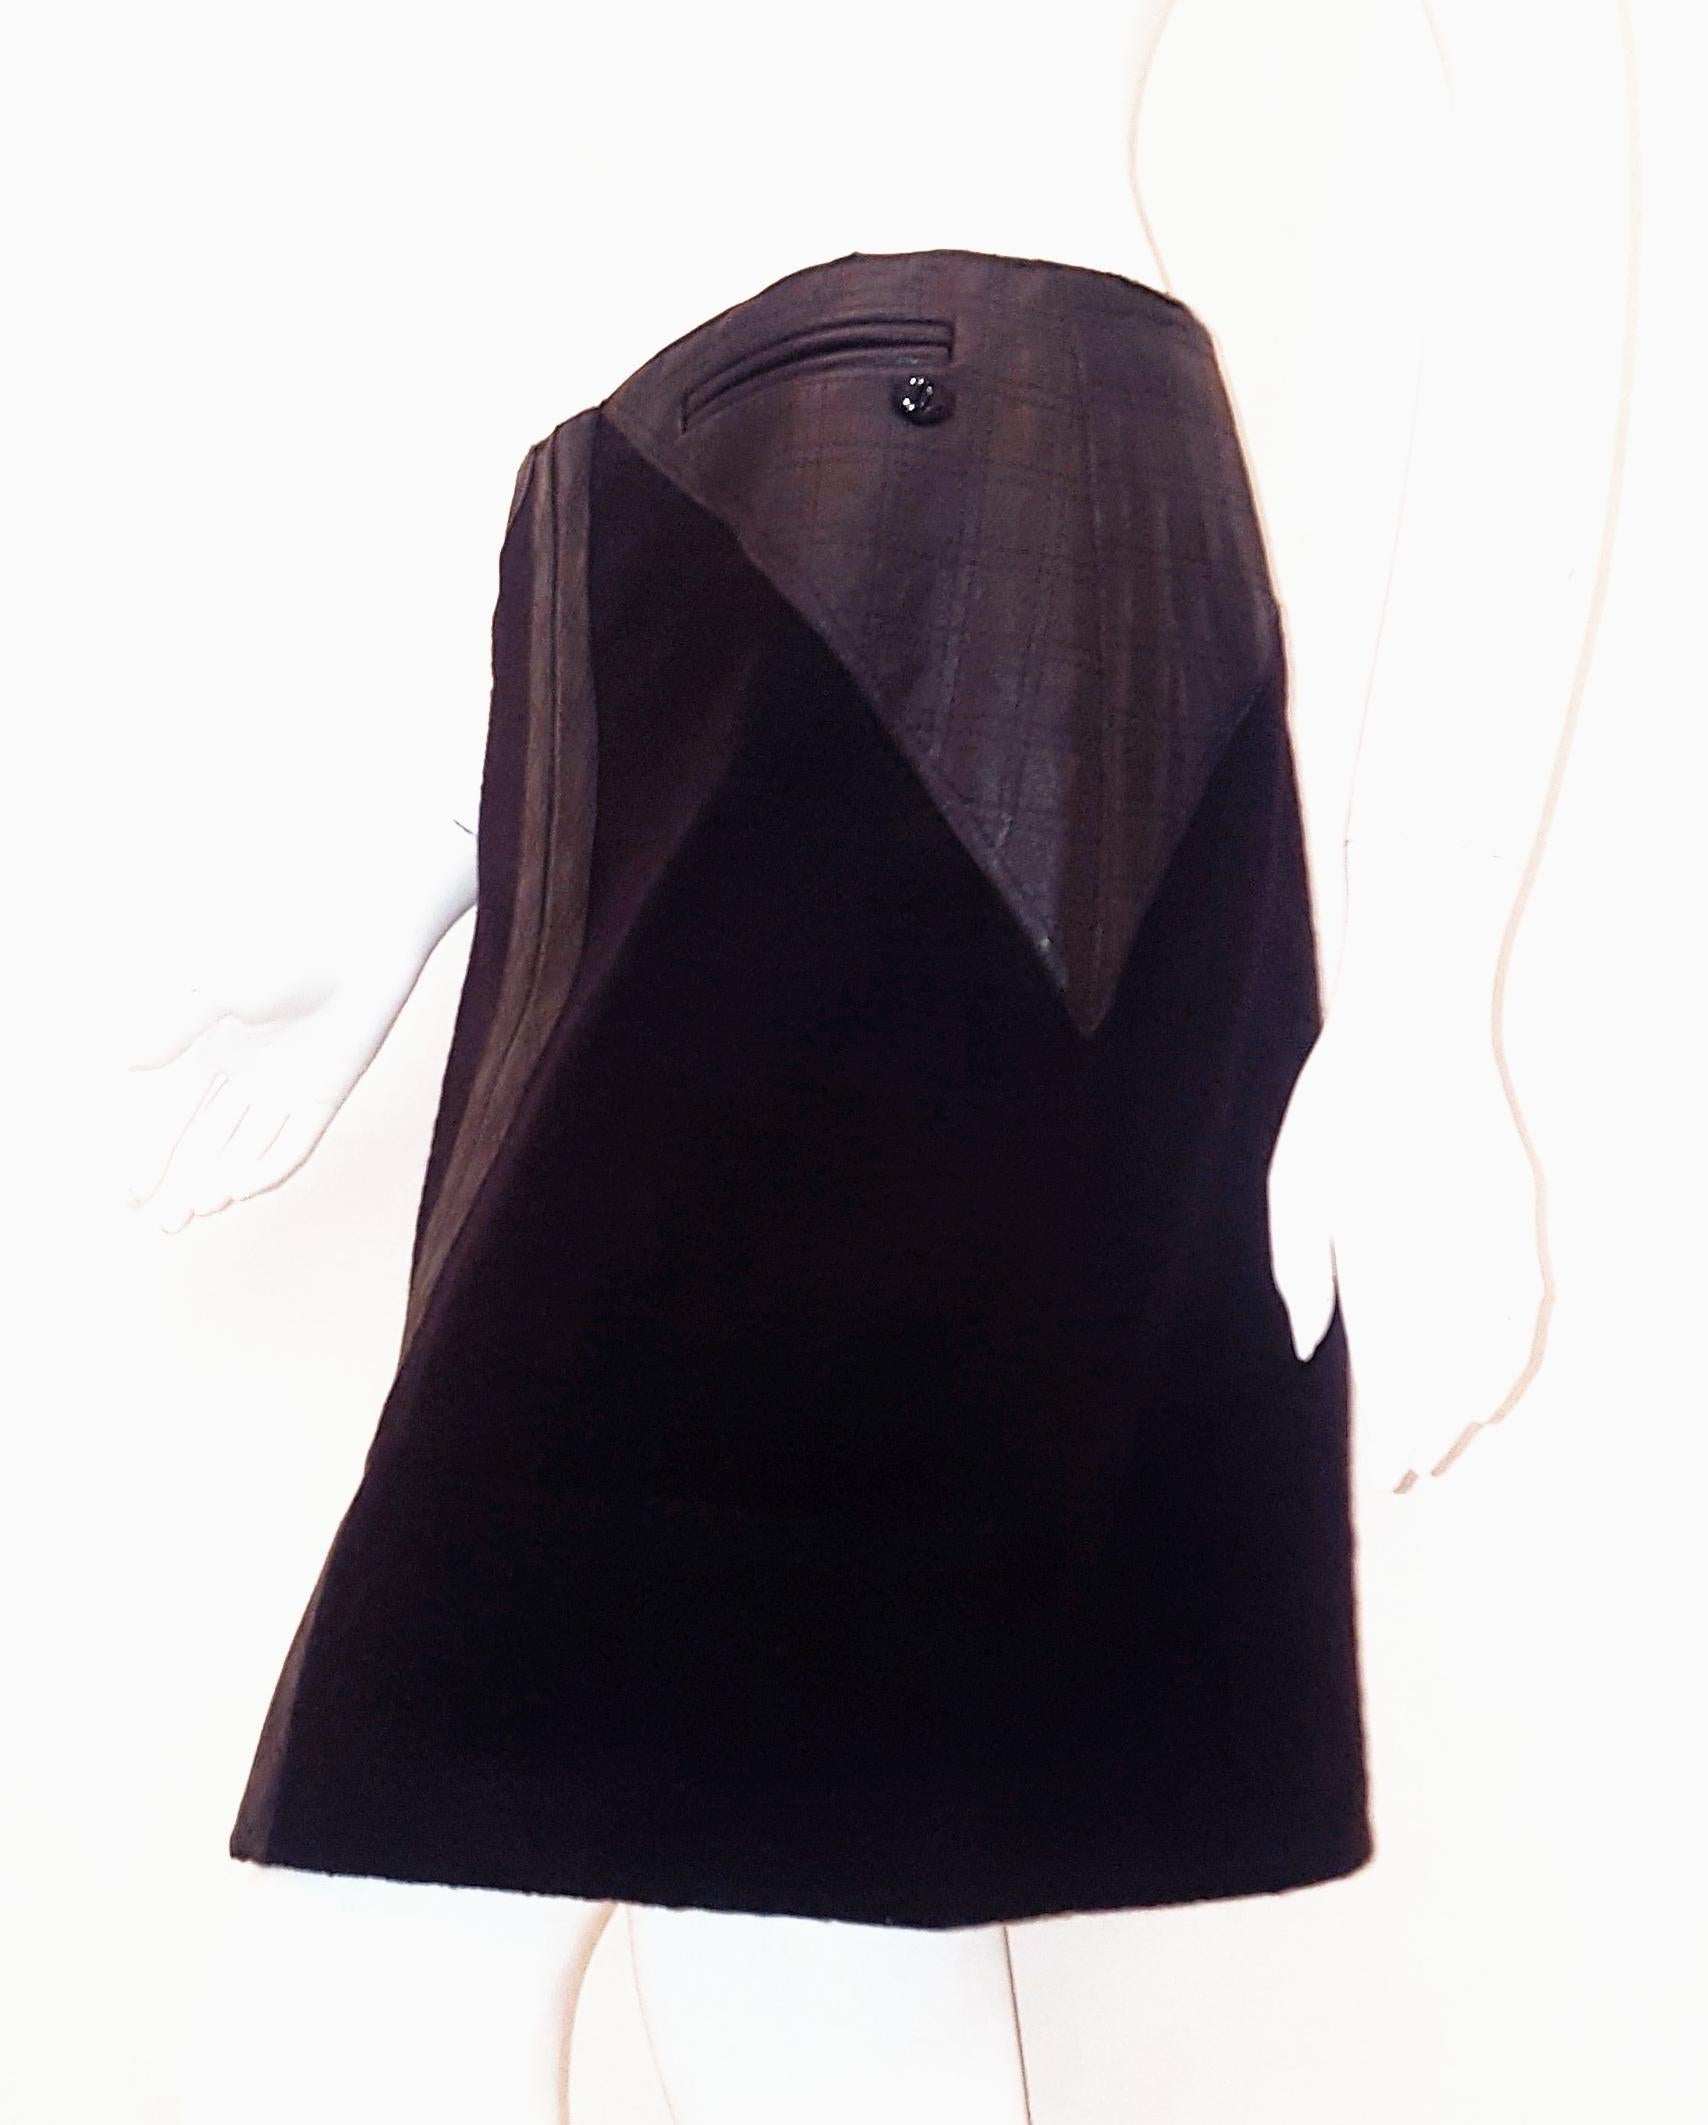 Chanel black wool skirt features triangle leather trim at the side of the skirt at the hip.  Two leather plackets can be found at front of skirt with a slit at hem.  Two faux pockets at front and the iconic Chanel CC plaque at one side.  For closure